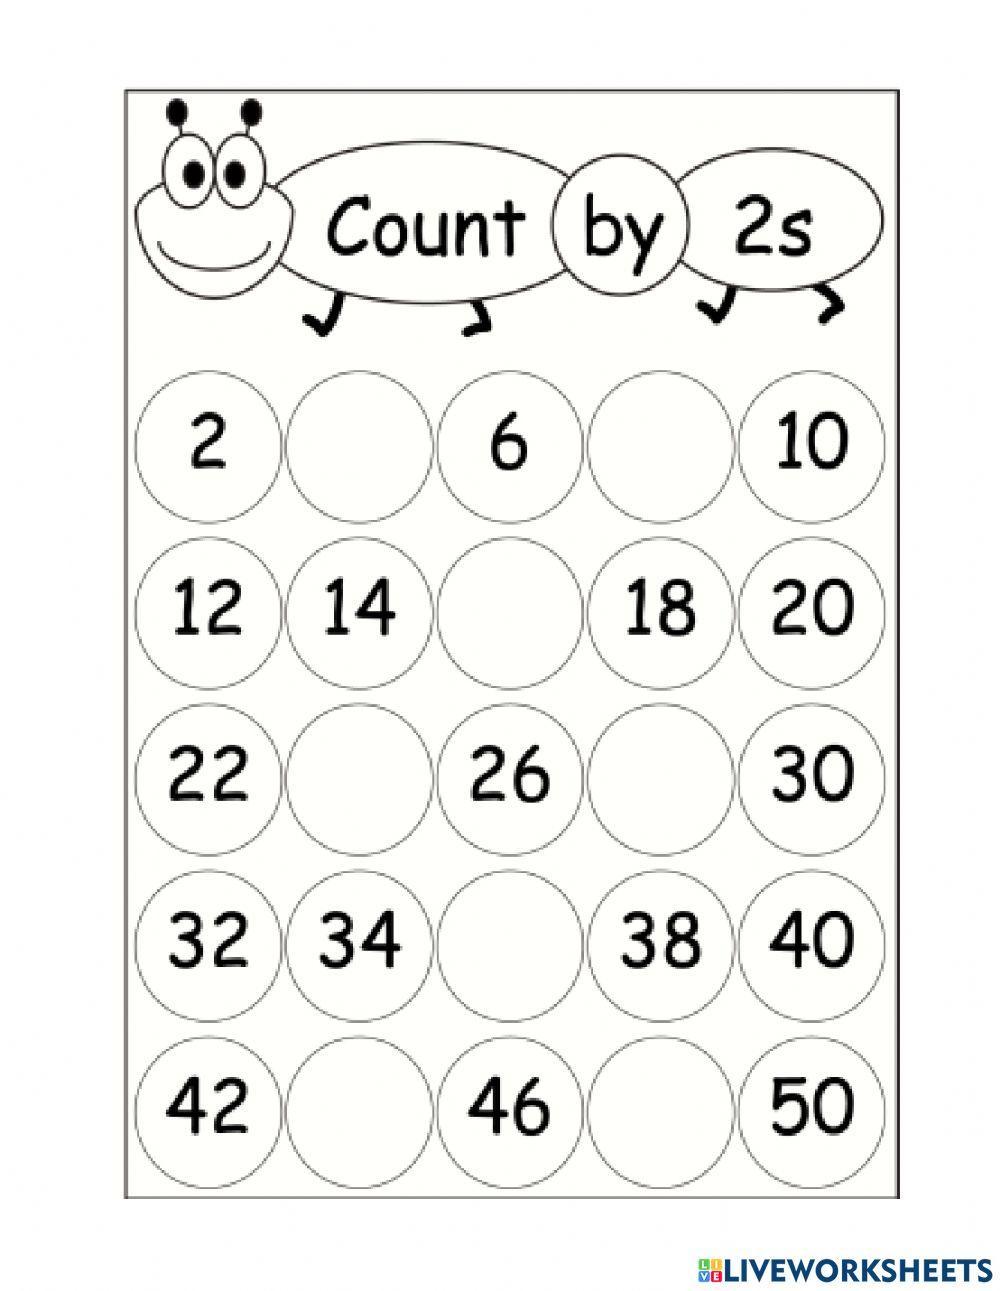 Counting in 2's